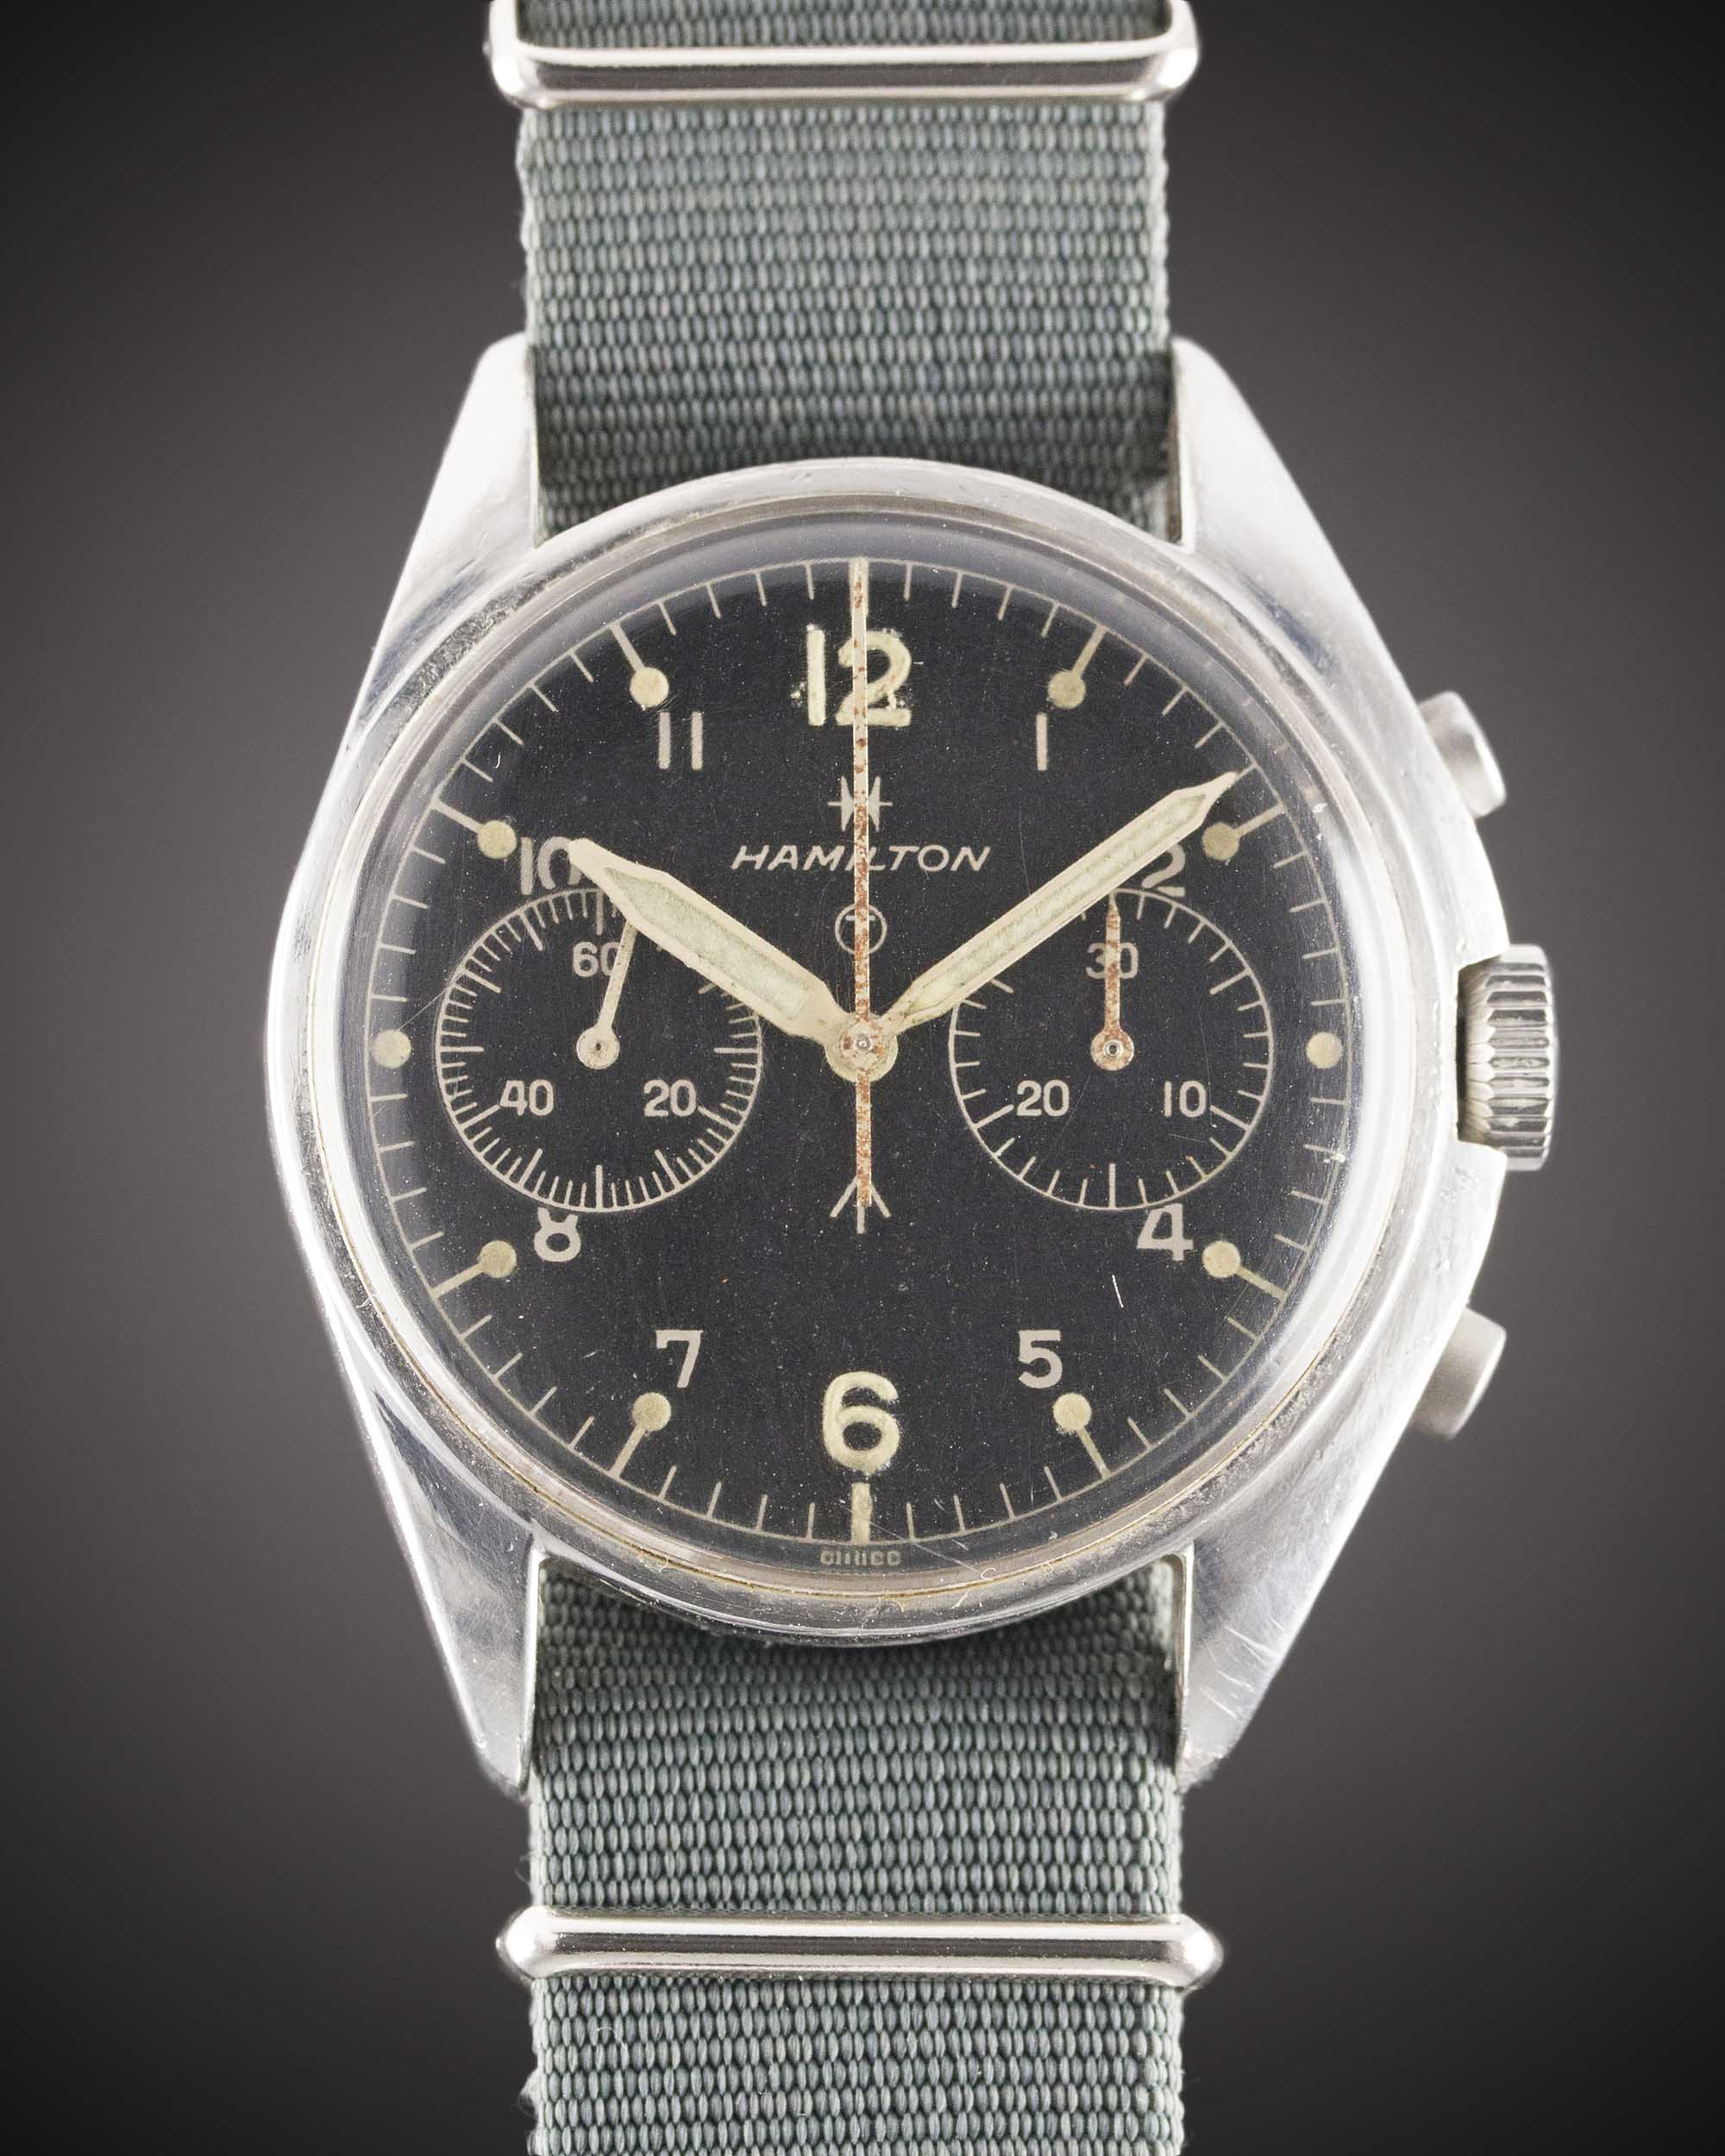 A COMPLETE SET OF GENTLEMAN'S STAINLESS STEEL BRITISH MILITARY "FAB FOUR" RAF PILOTS CHRONOGRAPH - Image 5 of 8